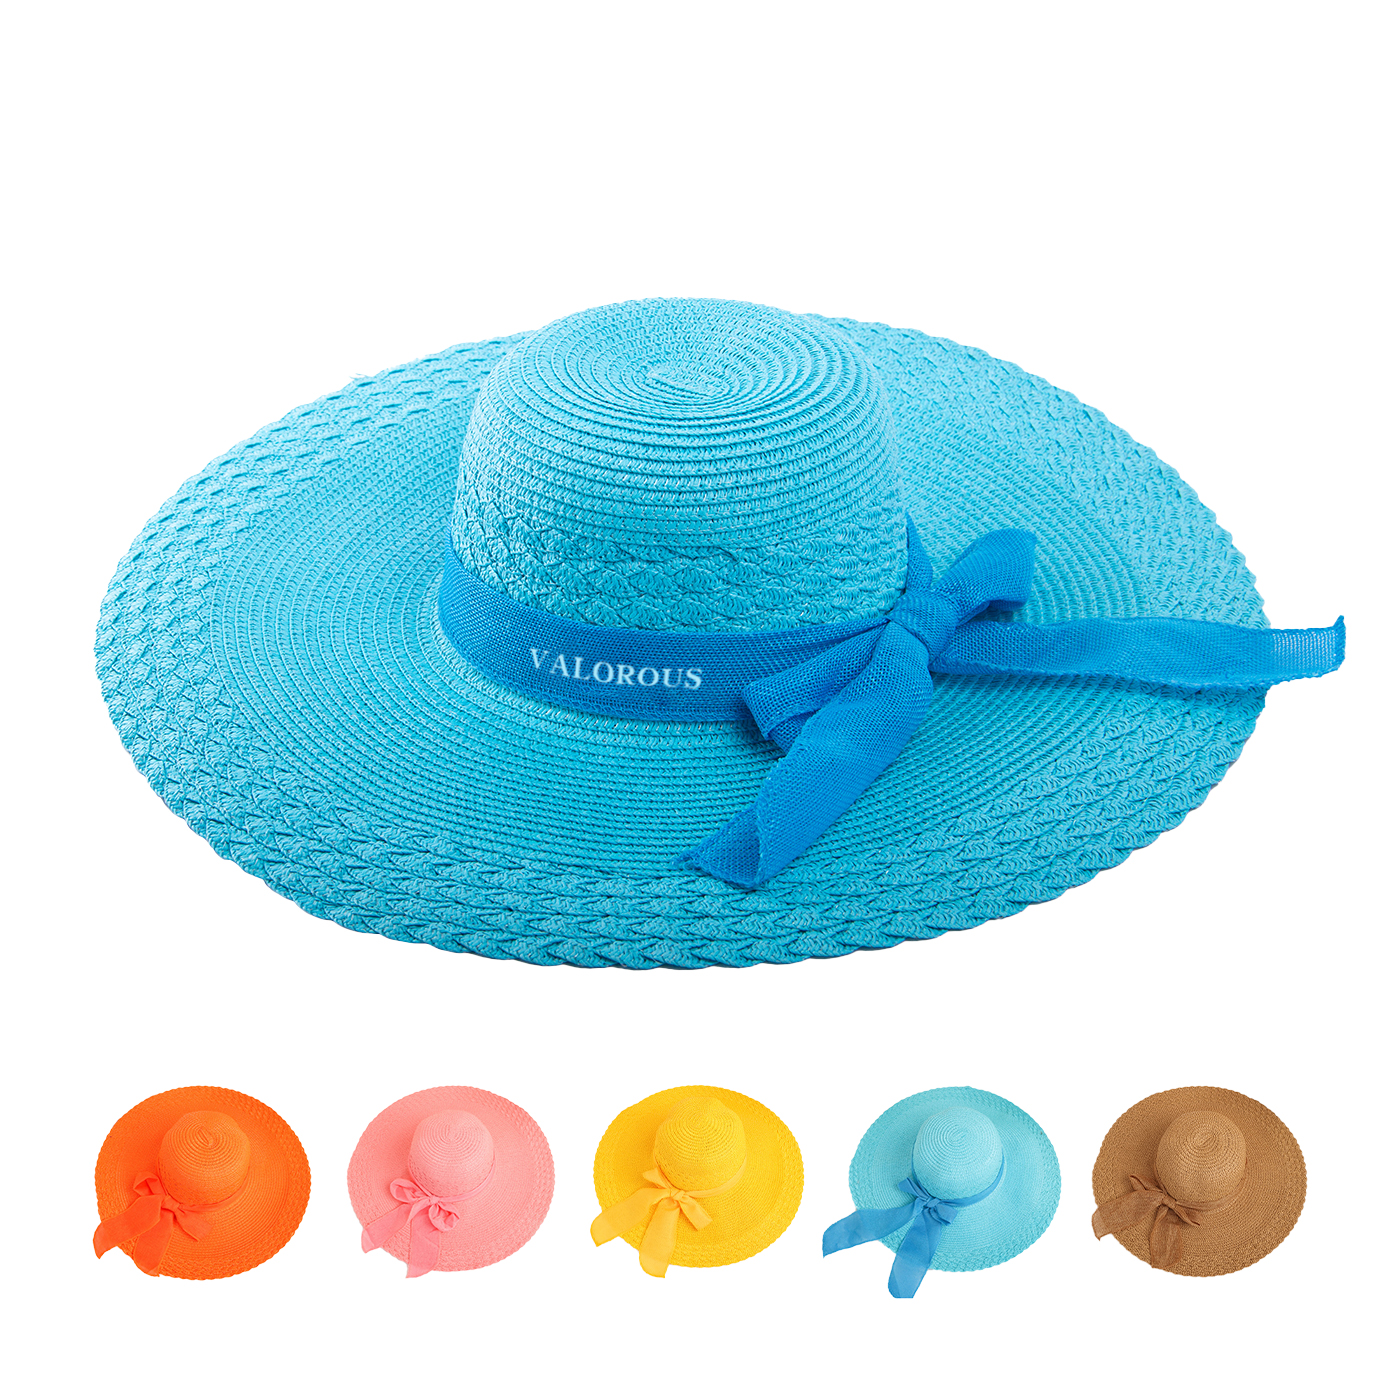 Foldable Wide Brim Floppy Straw Hat With Bow